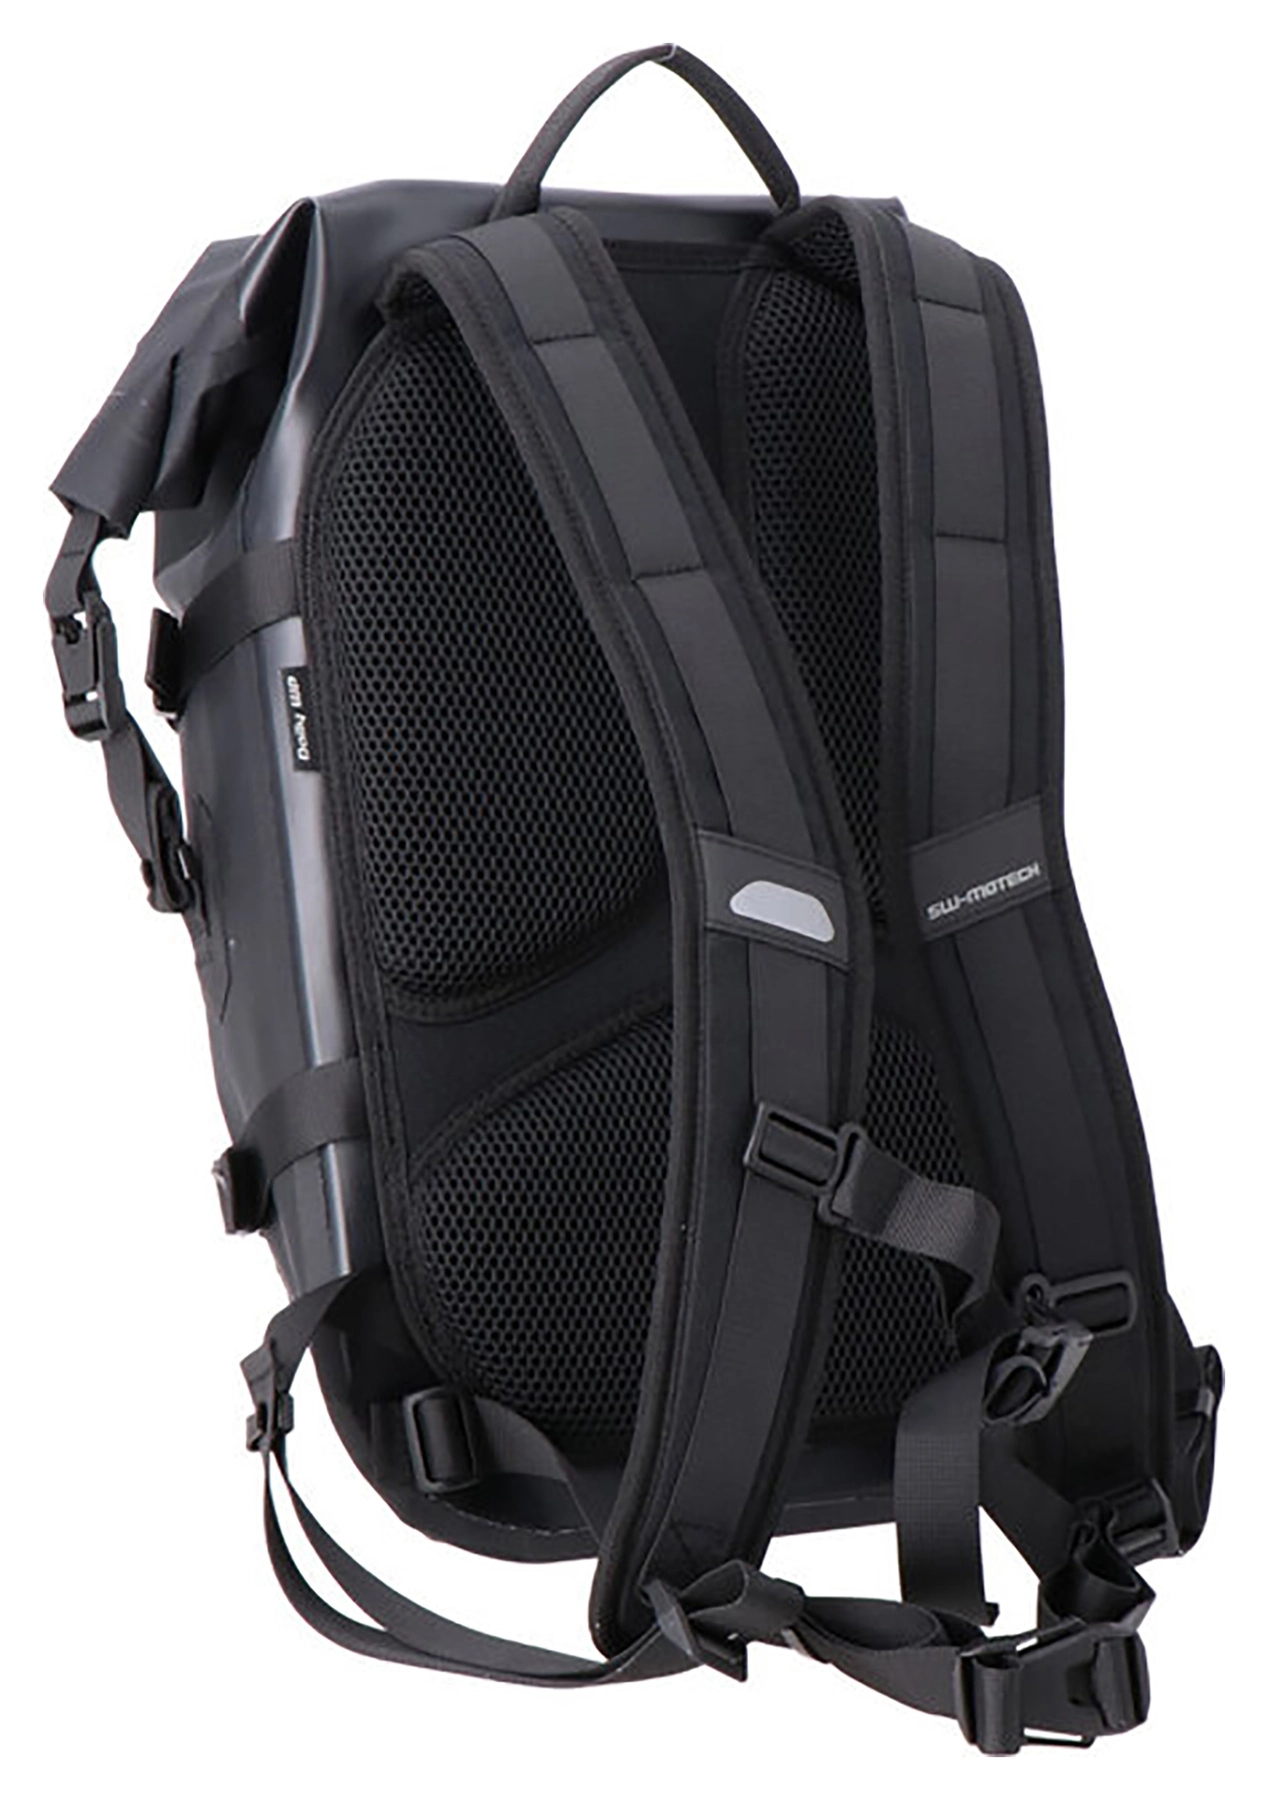 SW-MOTECH BACKPACK DAILY